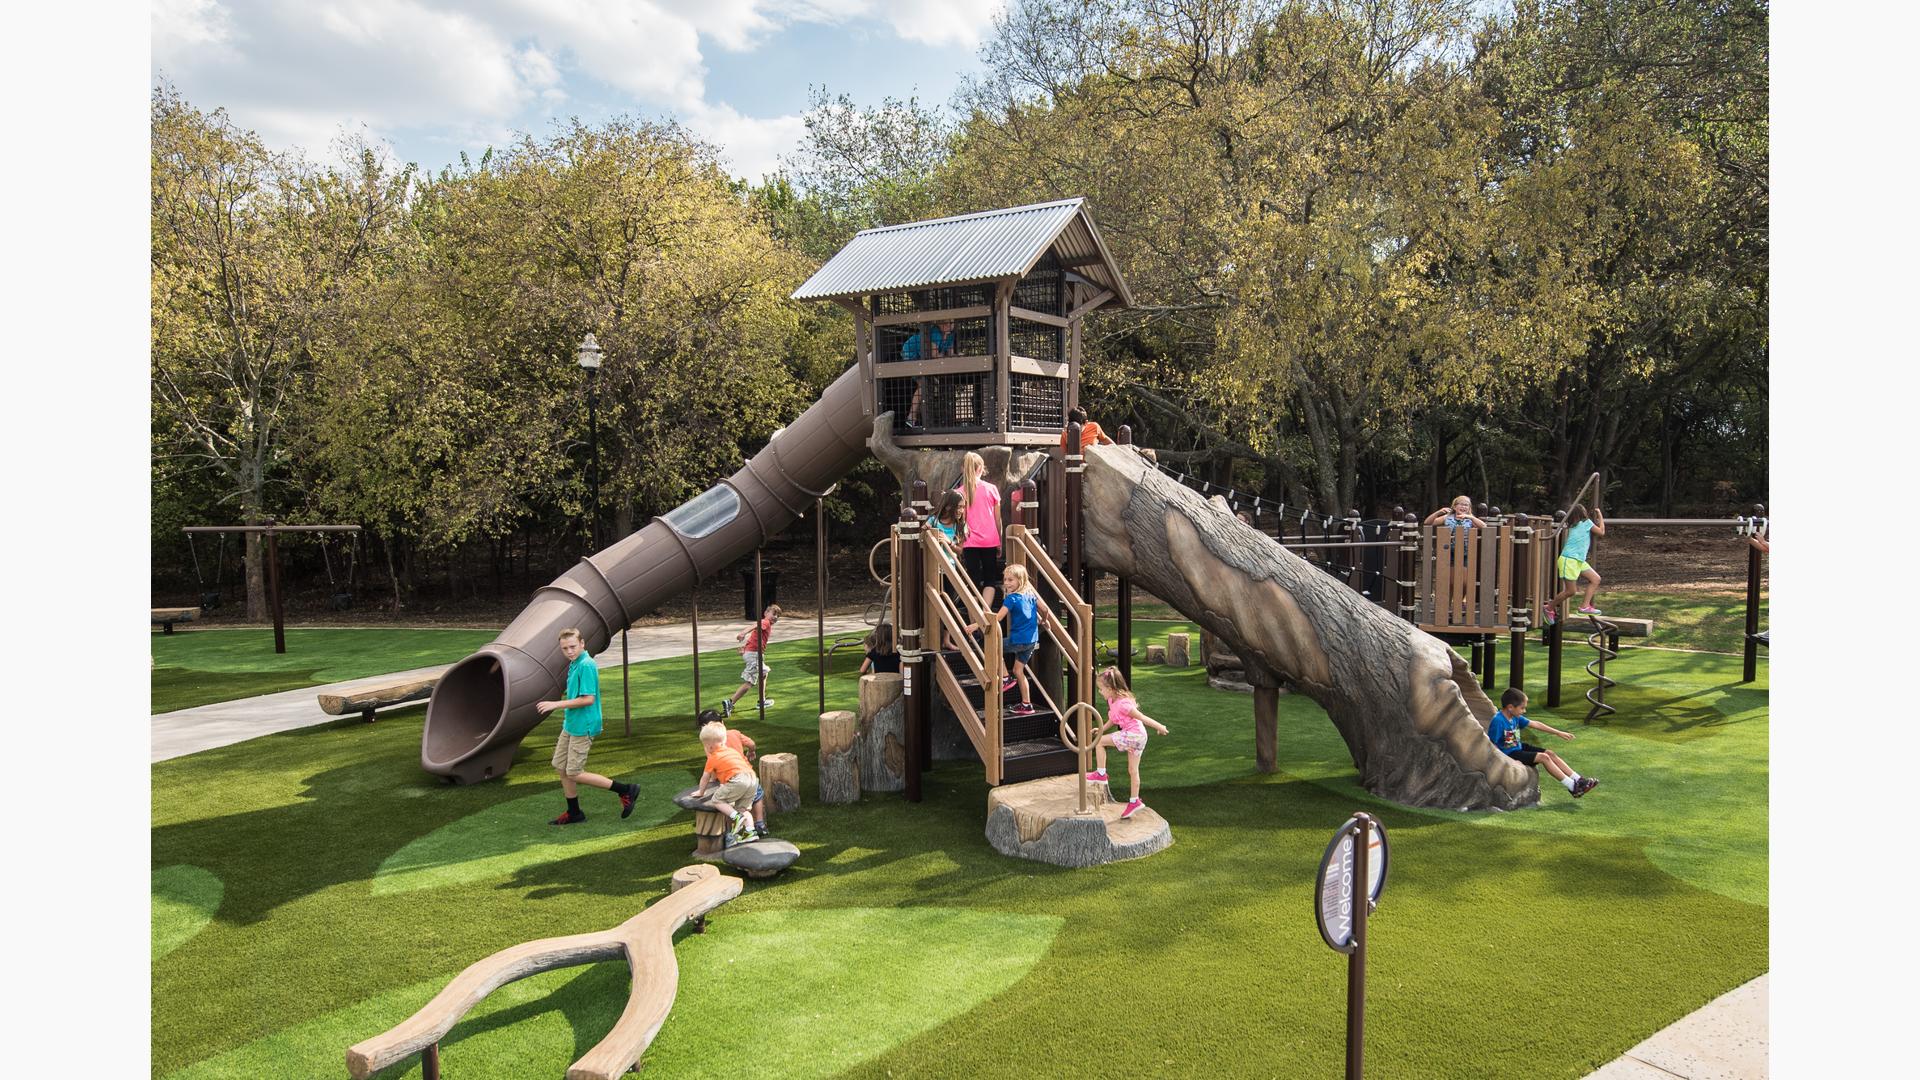 Children play on a tree house like structure with nature themed log climbers and slides.